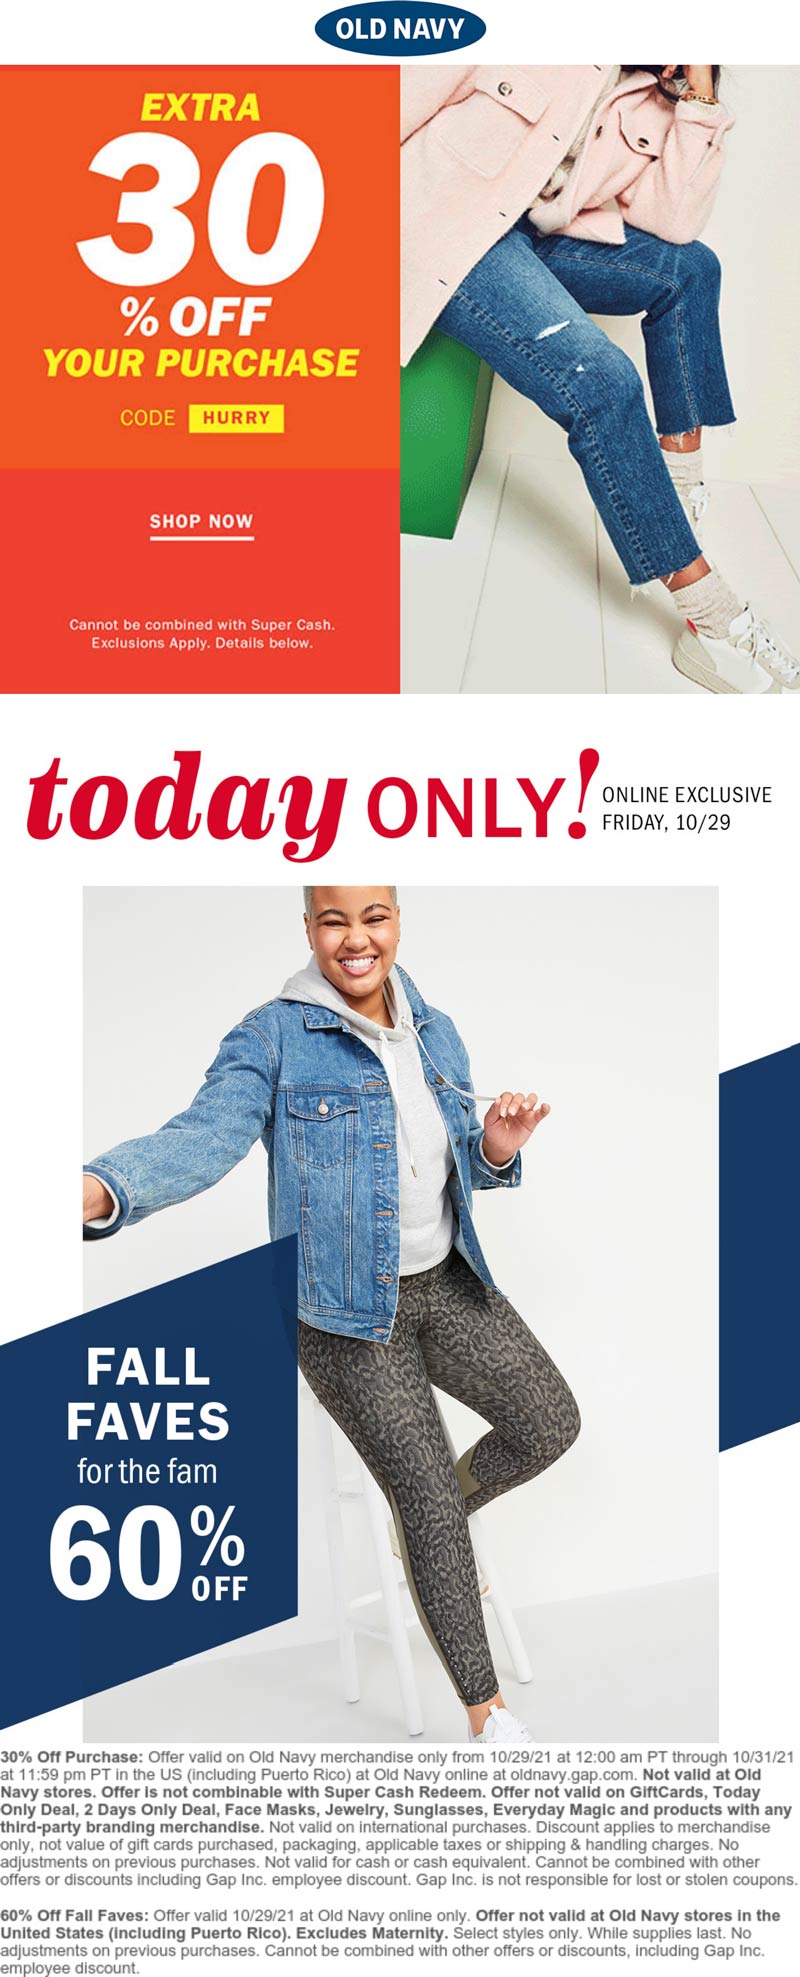 Old Navy stores Coupon  60% off Fall faves & more online today at Old Navy via promo code HURRY #oldnavy 